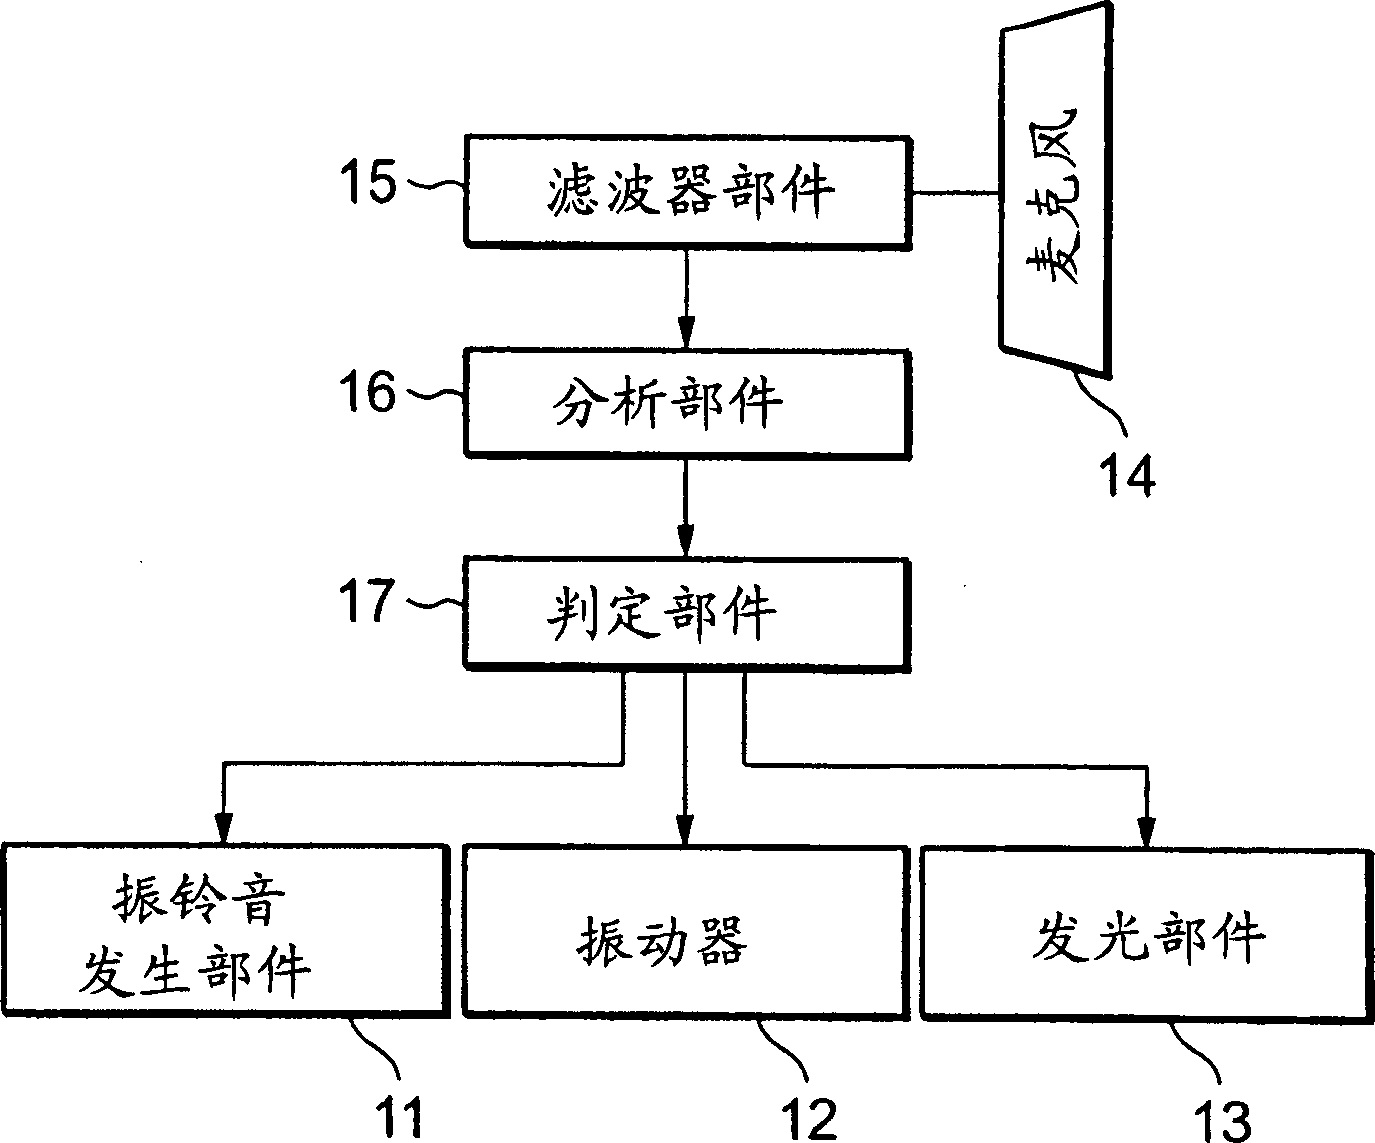 Mobile terminal equipment and method for contralling calling notice